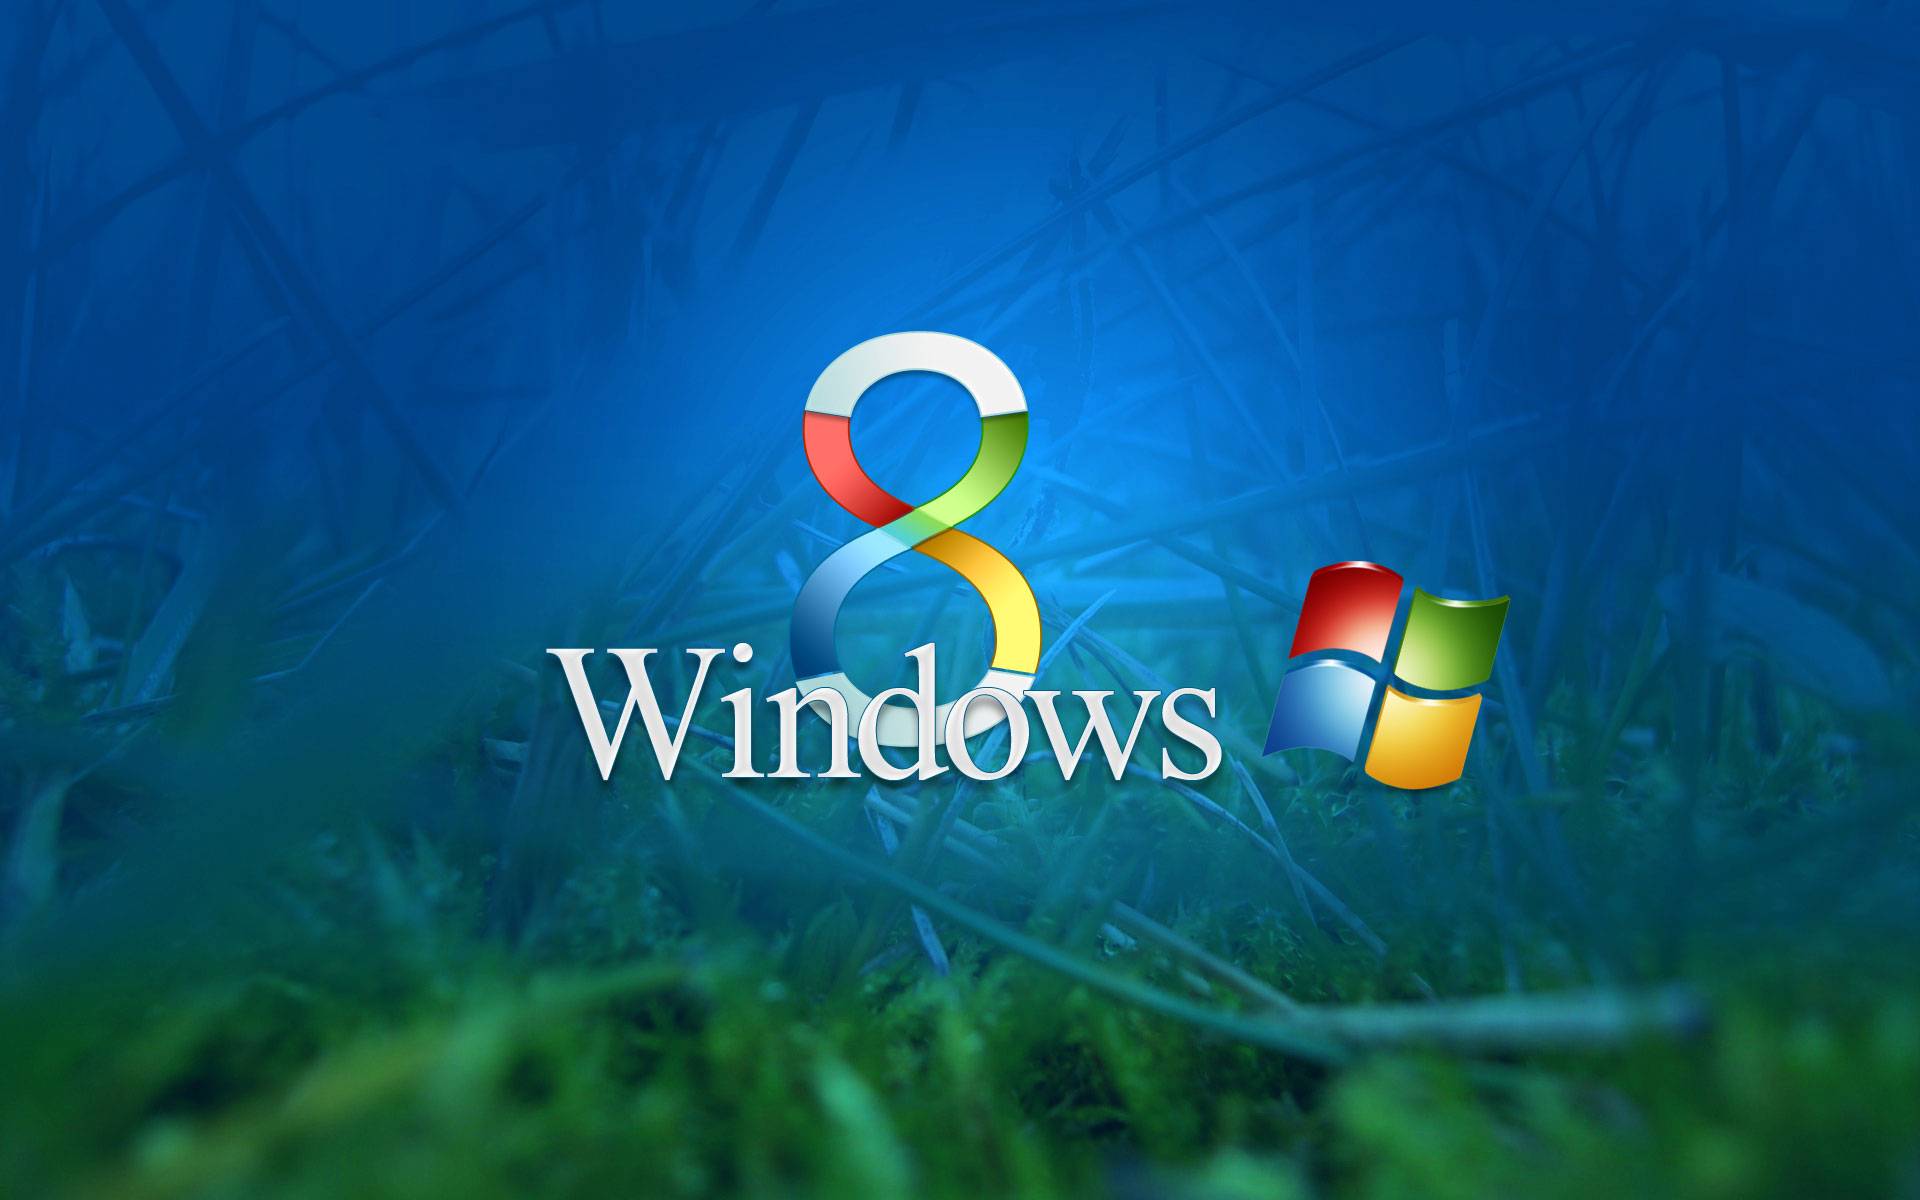 Windows 8 Animated Wallpapers Group (67+)